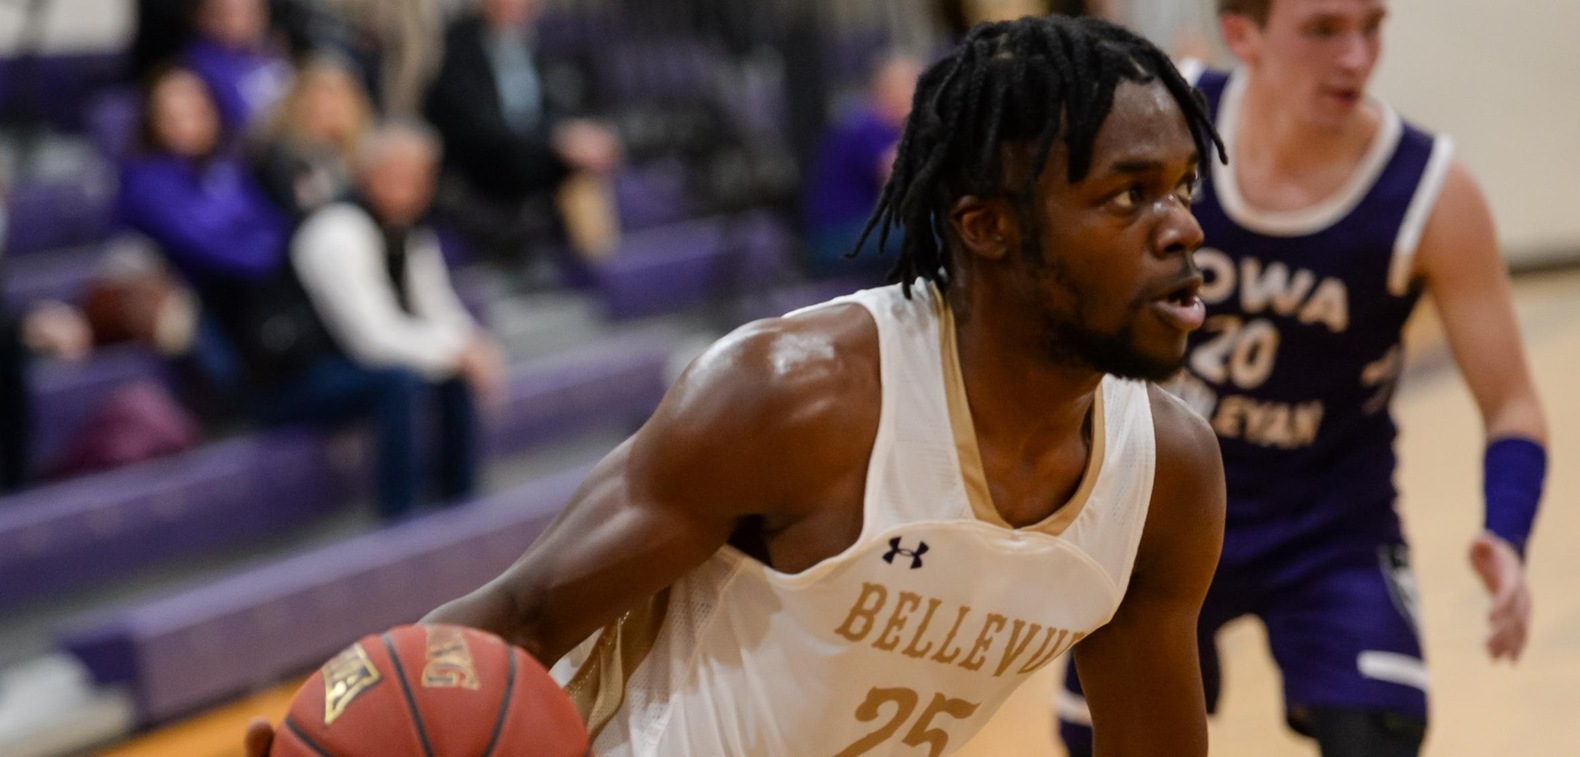 Jerome Bynum scored a season-high 14 points on 6-of-9 shooting to help BU beat VCSU on Saturday.